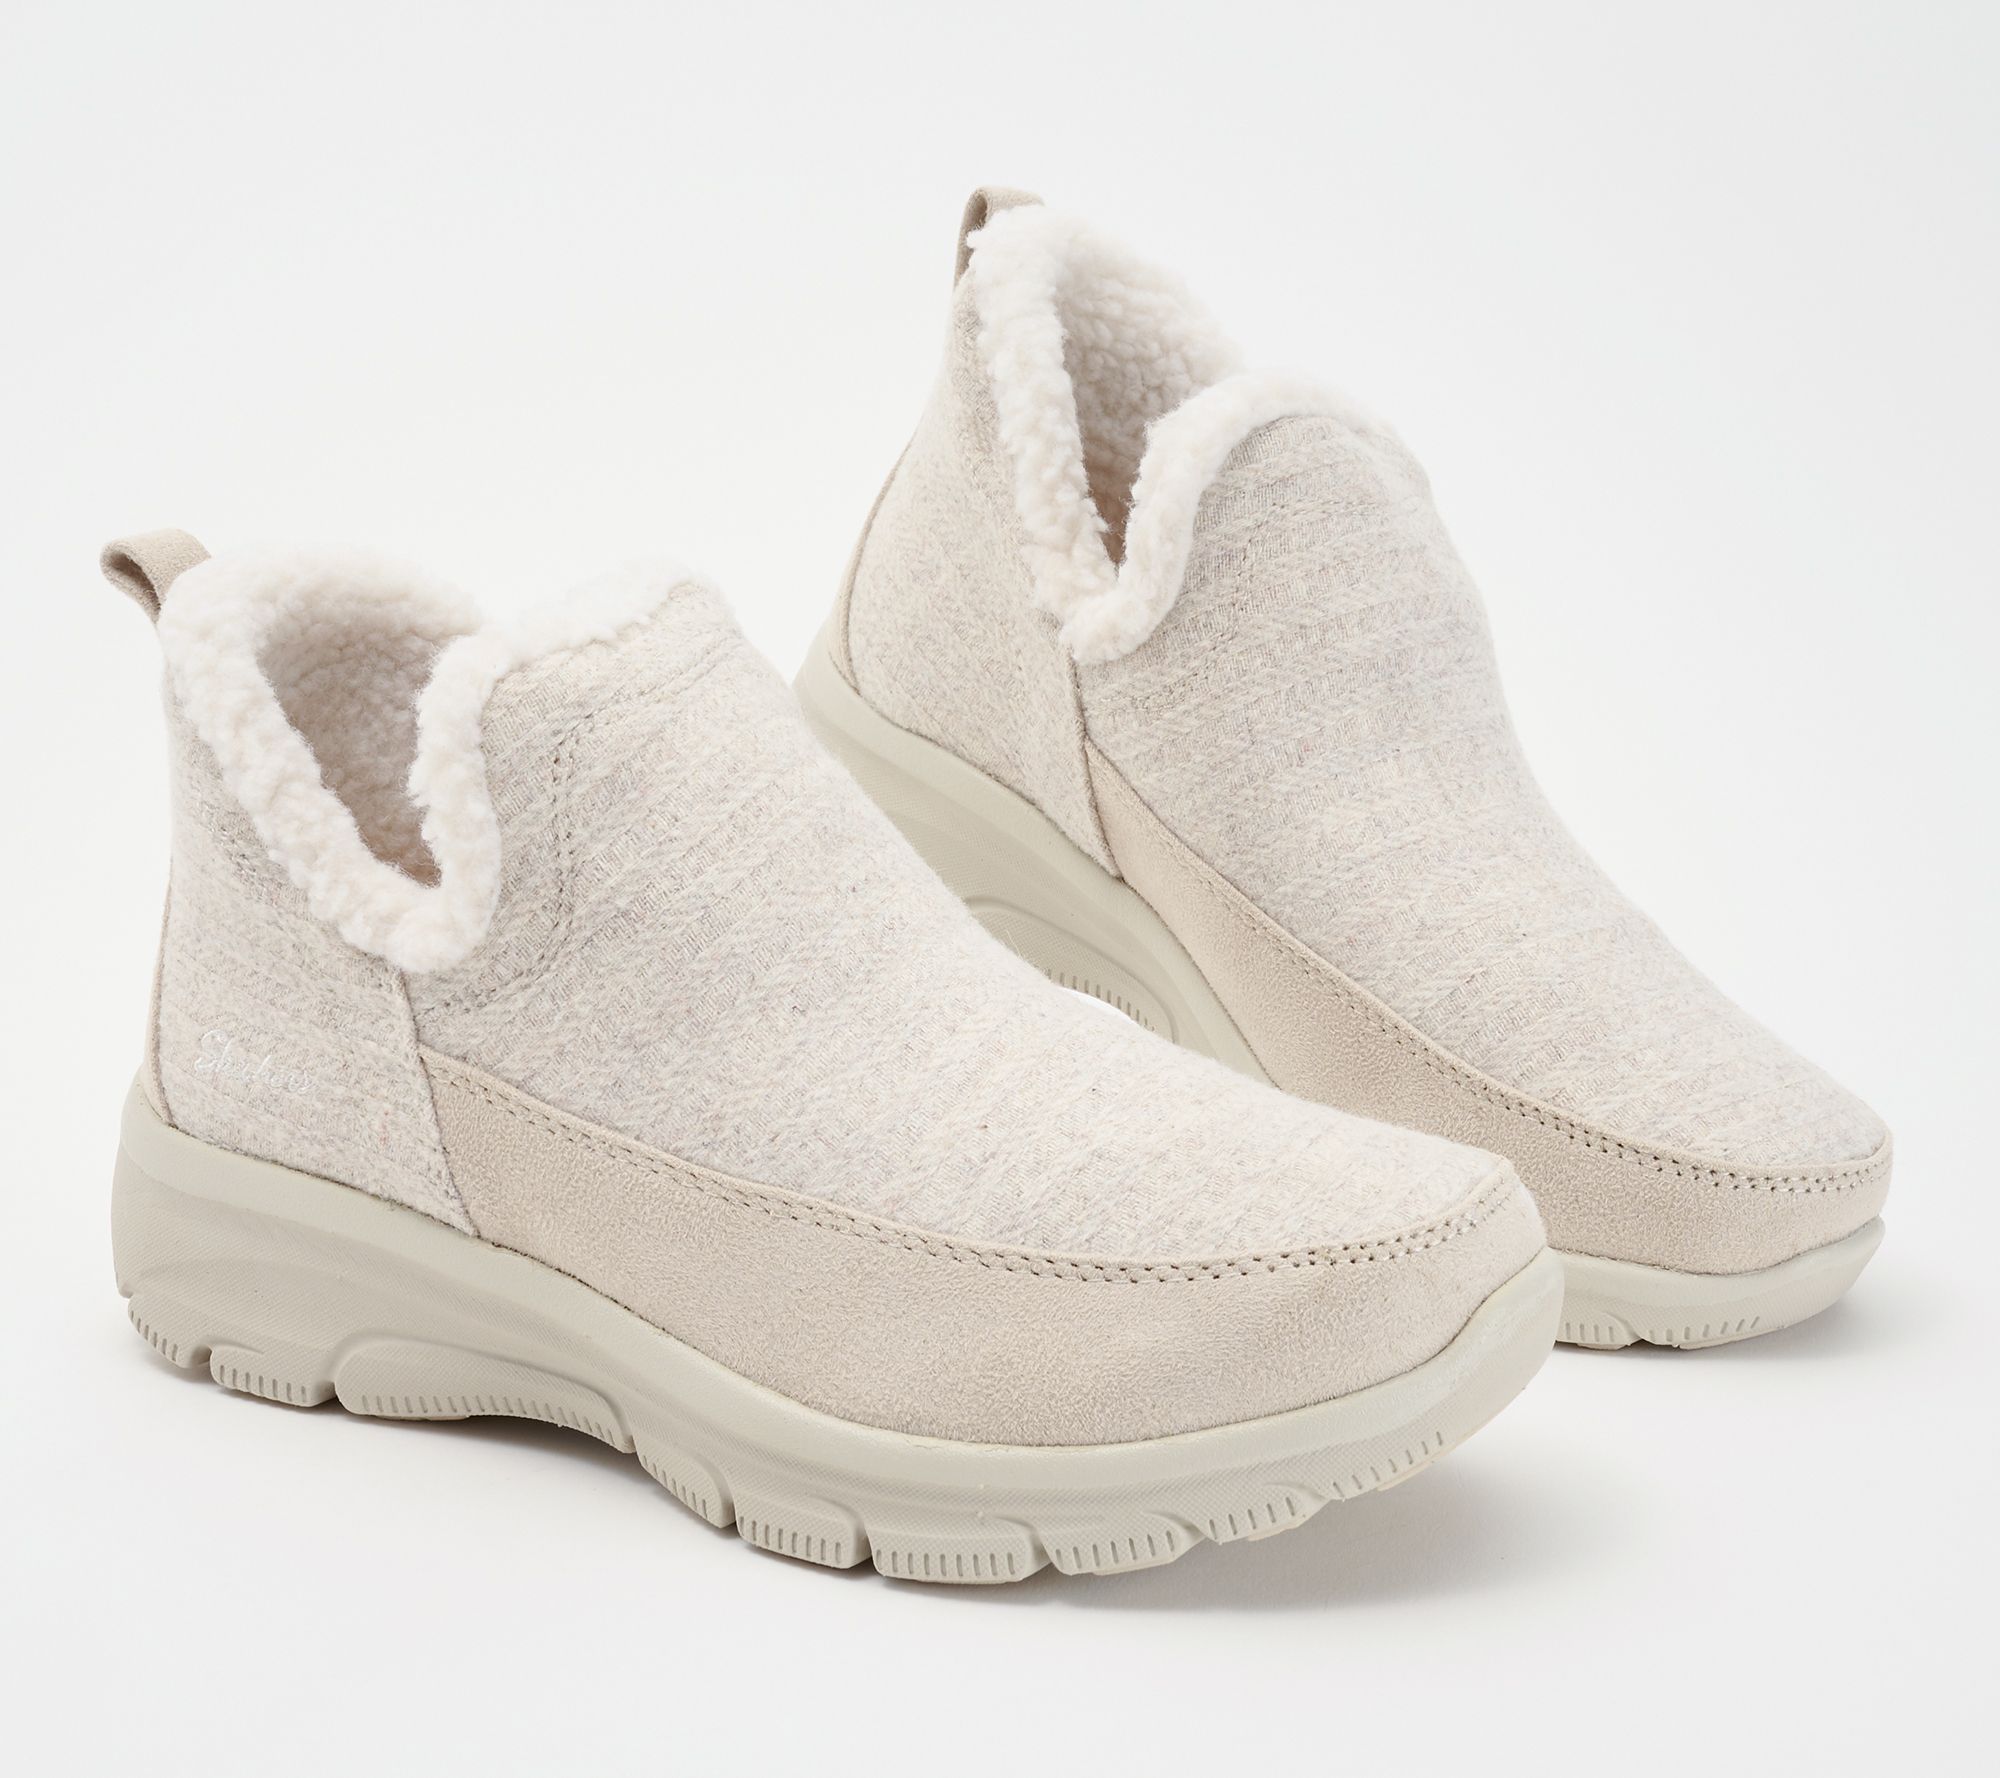 gips gastheer Astrolabium Skechers Relaxed Fit Faux Fur Wool Ankle Boots - Easy Going - QVC.com